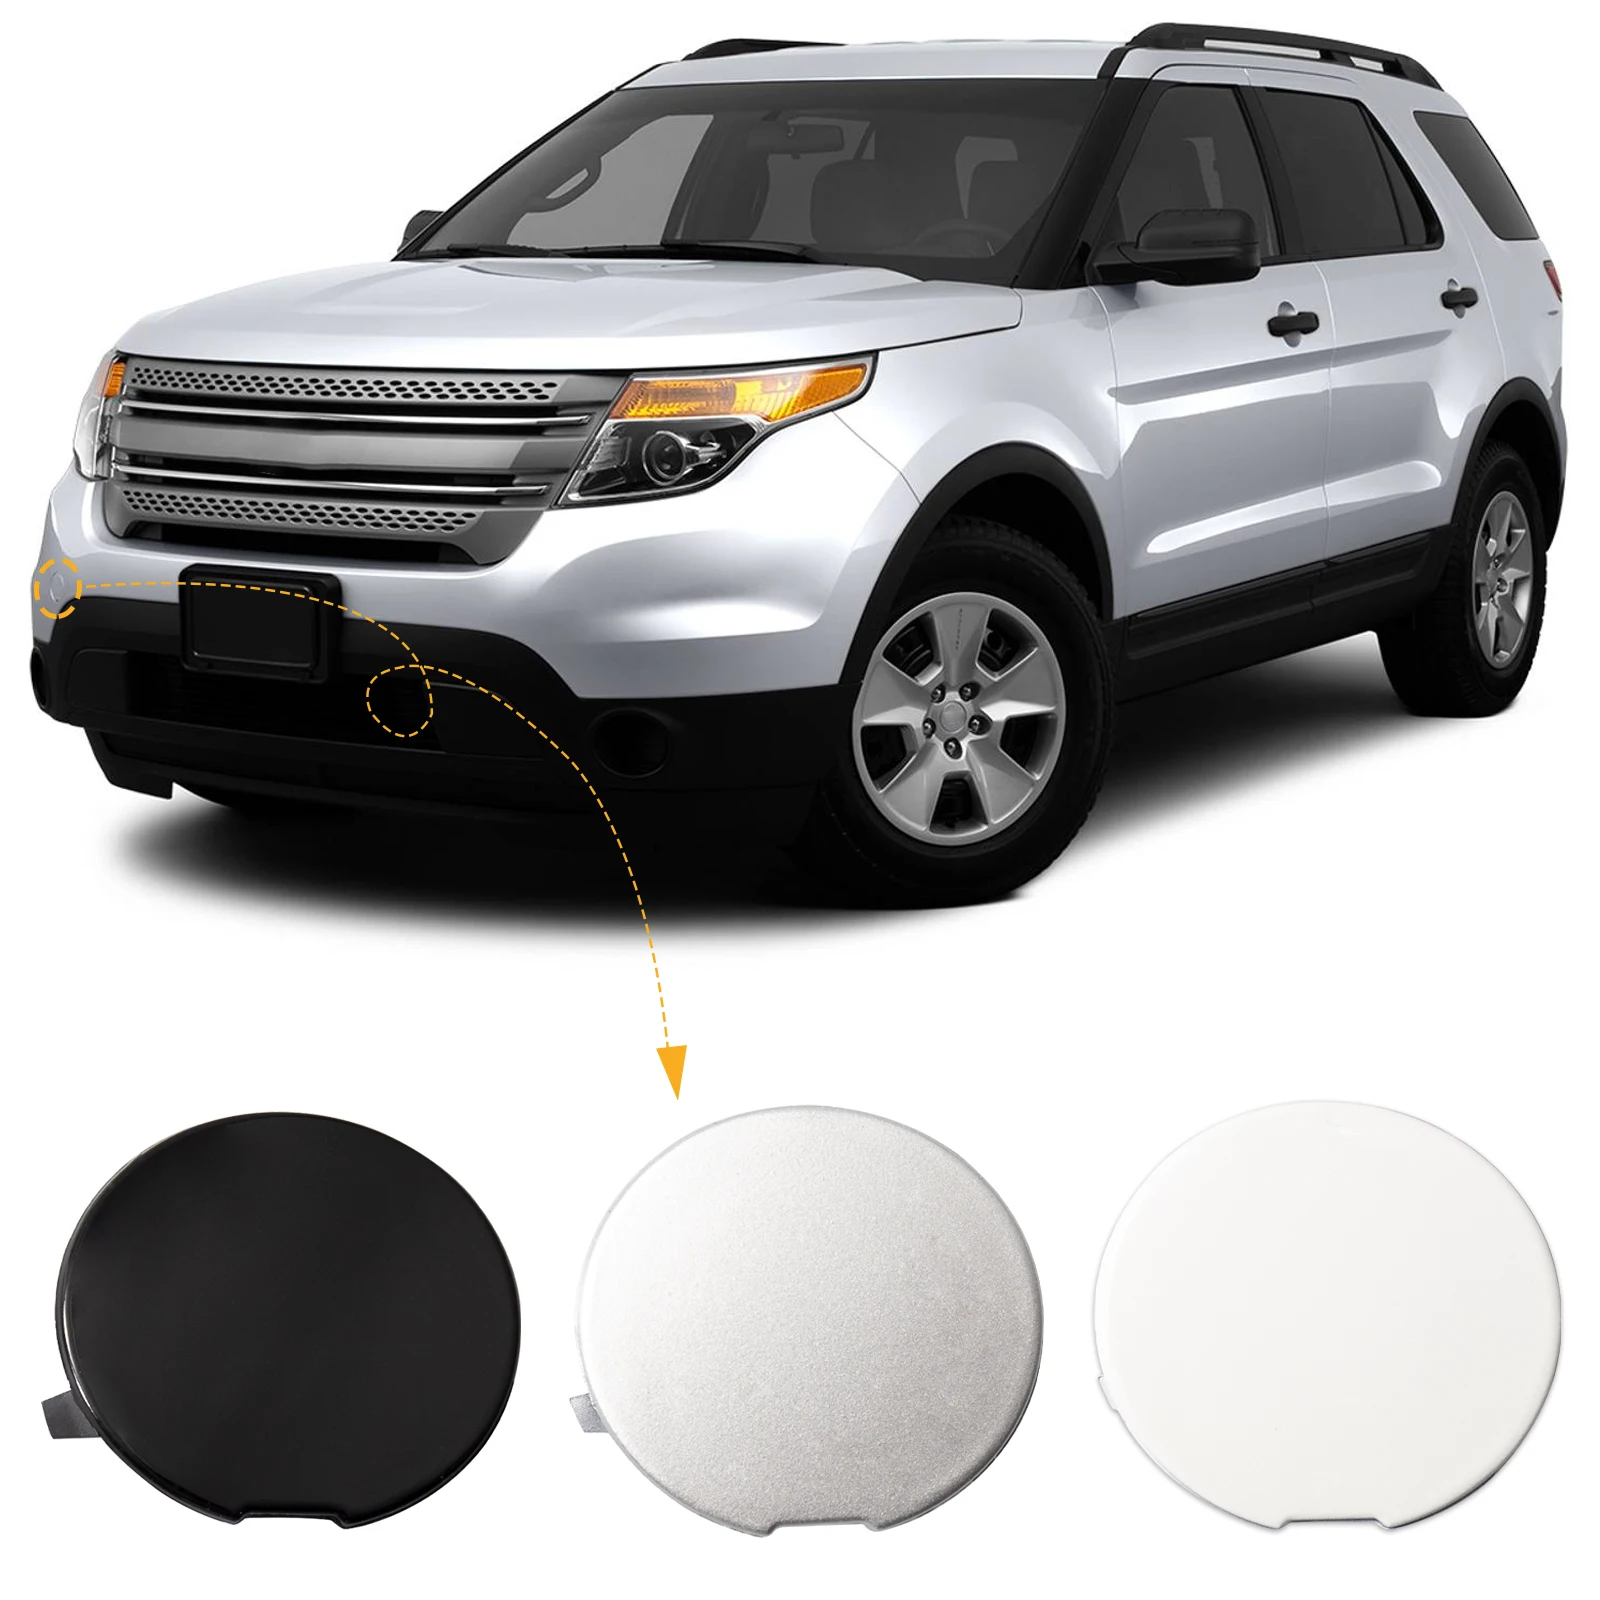 Front Bumper Tow Hook Cap Towing Eye Cover For Ford Explorer 2011-2015 - $25.04+